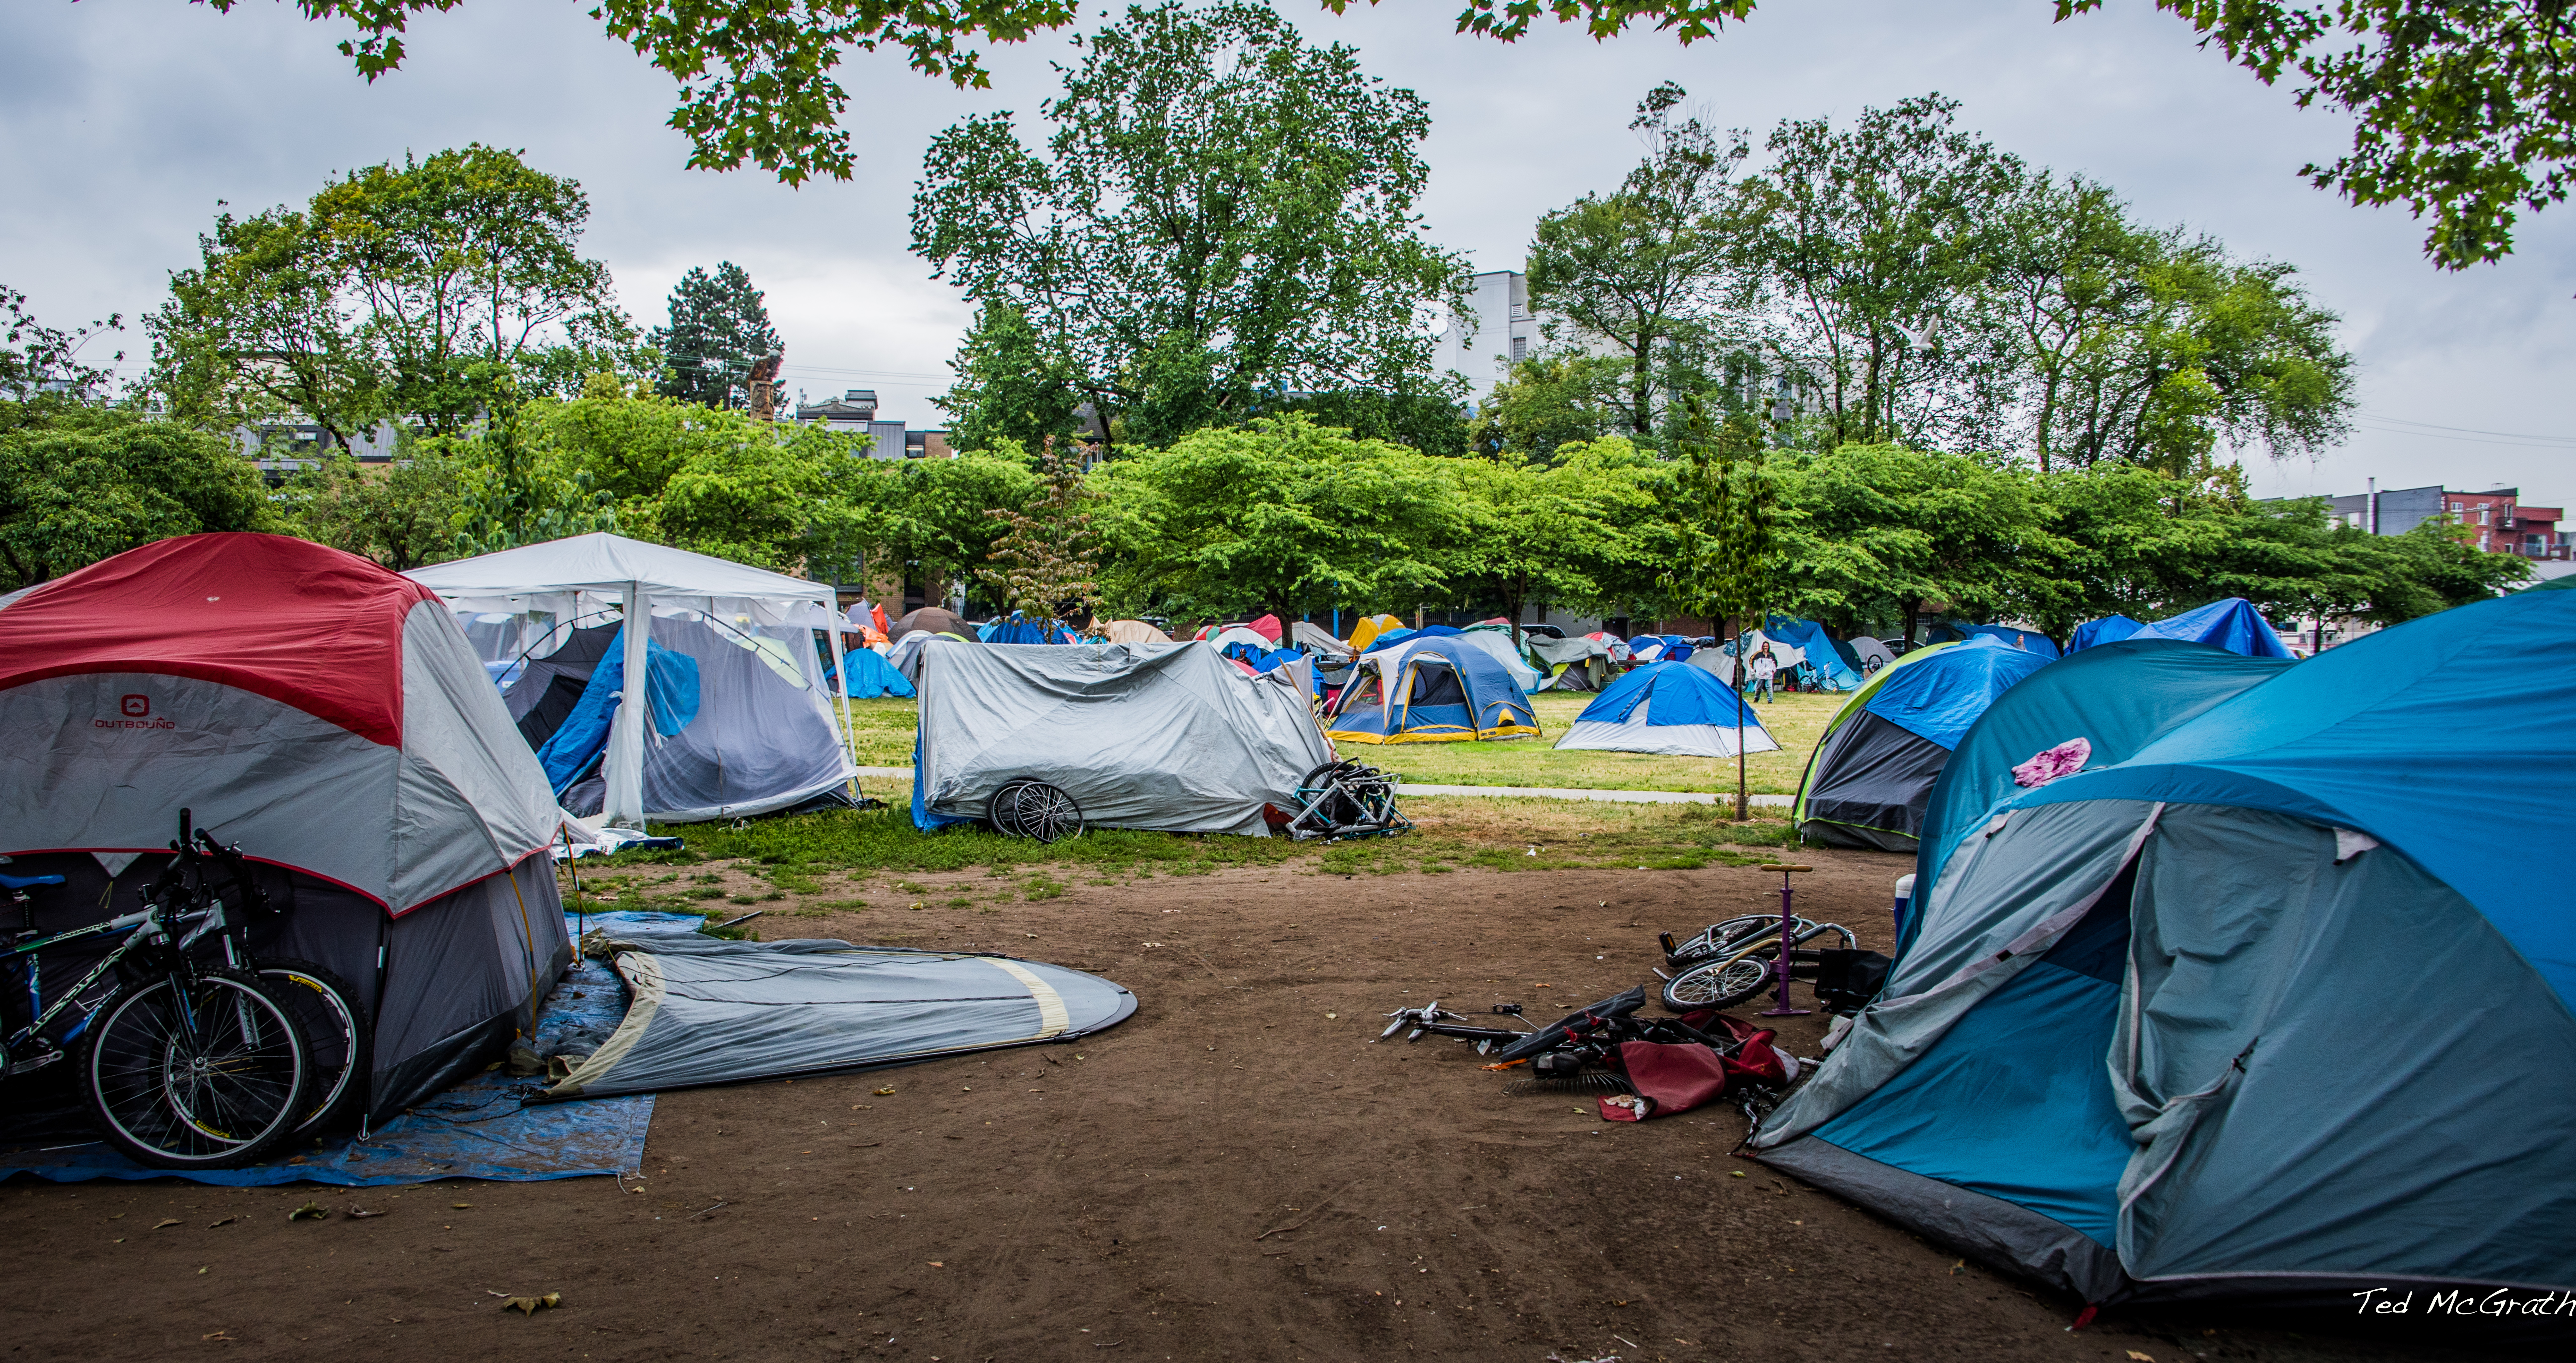 This is a photo of the Powell Street Tent City in Vancouver BC. Multiple tents are set up in a community space, with grass under them. Bikes and other belongings are standing up outside. No people can be seen.